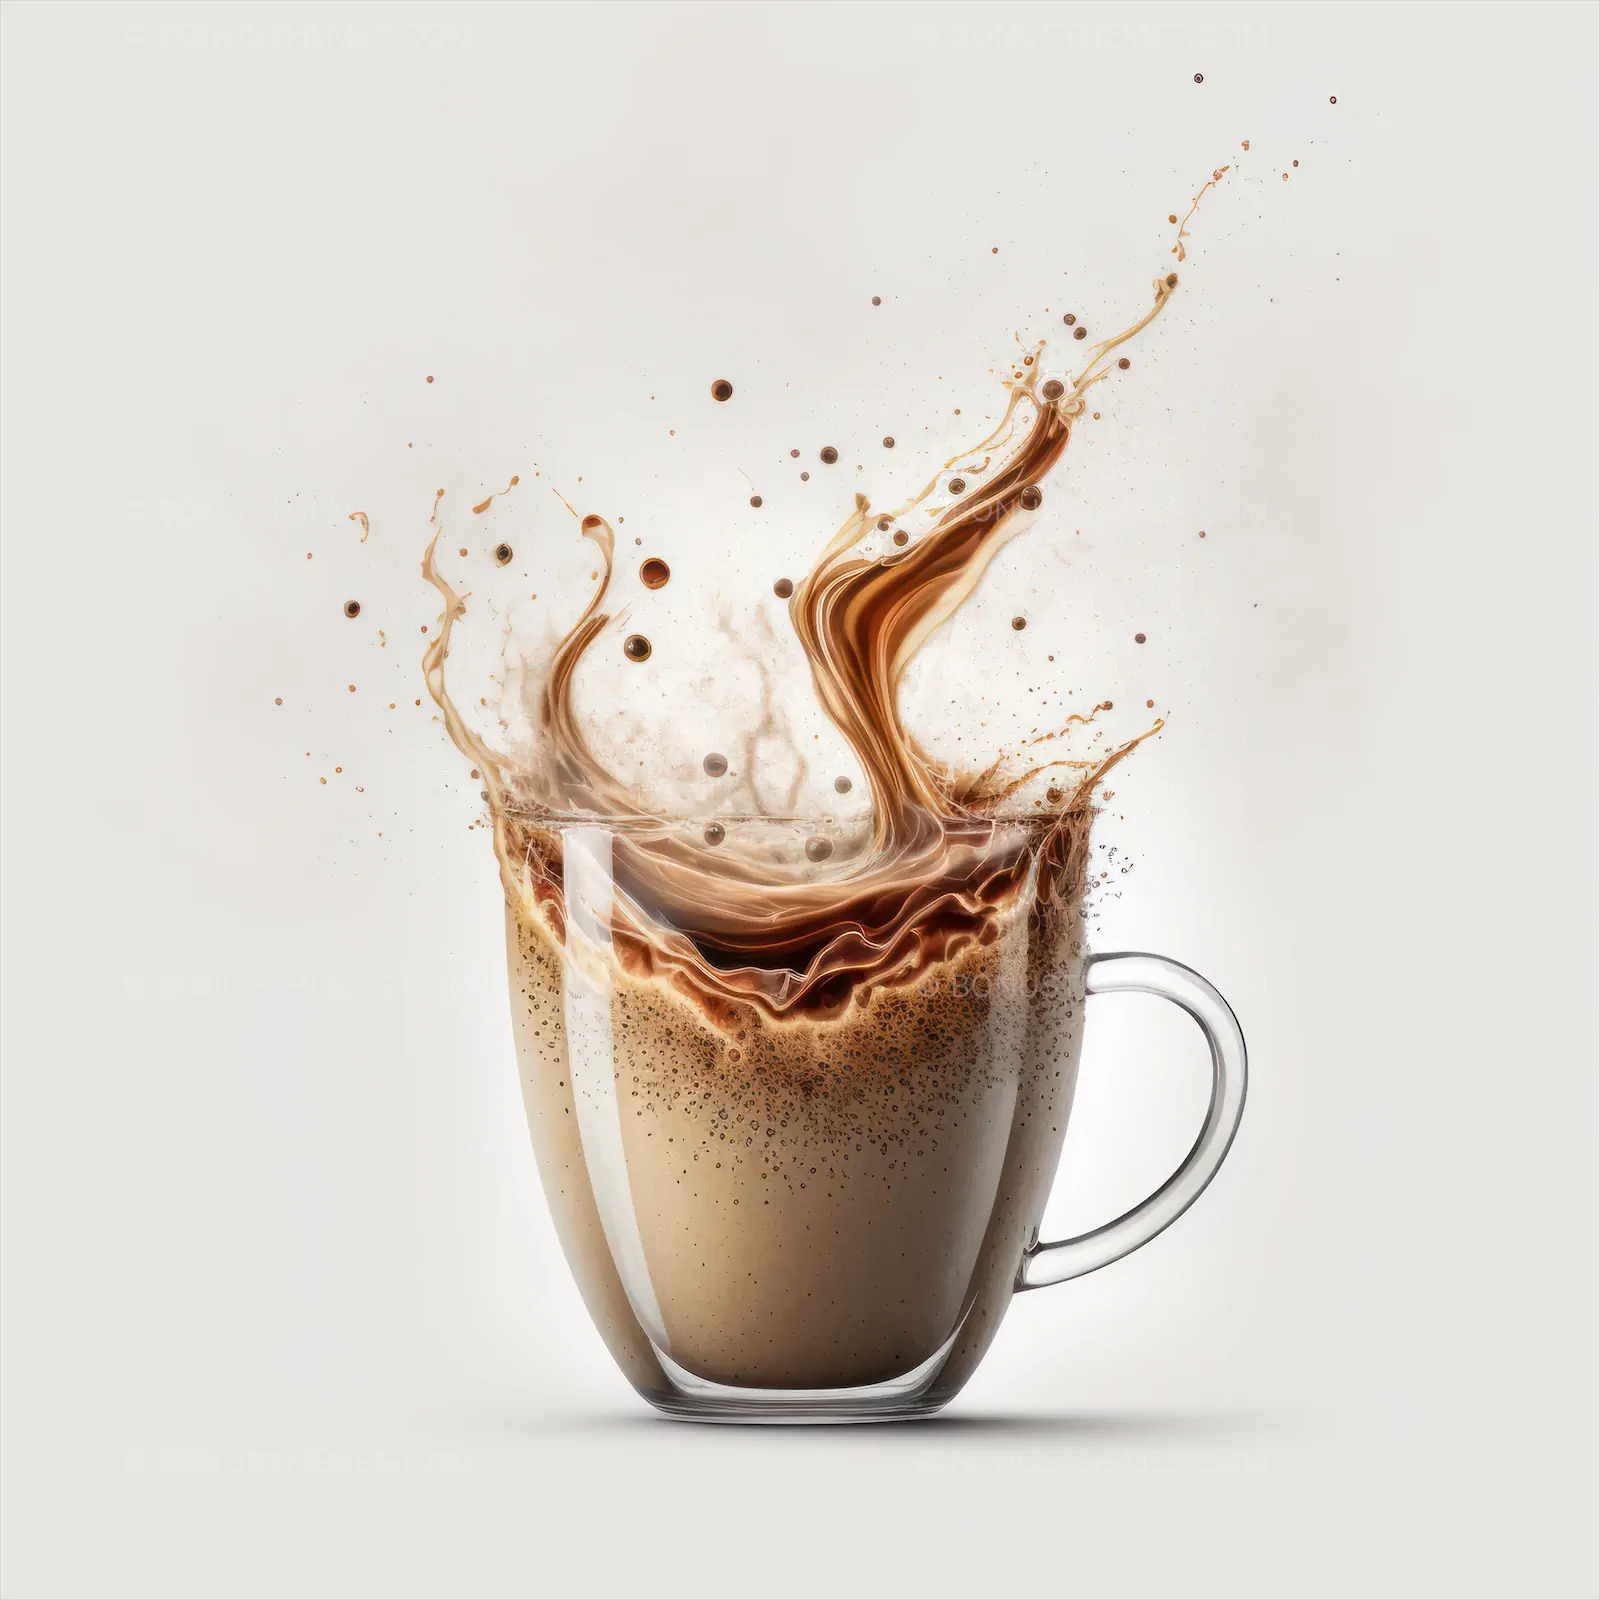 Glass cup of mocha coffee on isolated background